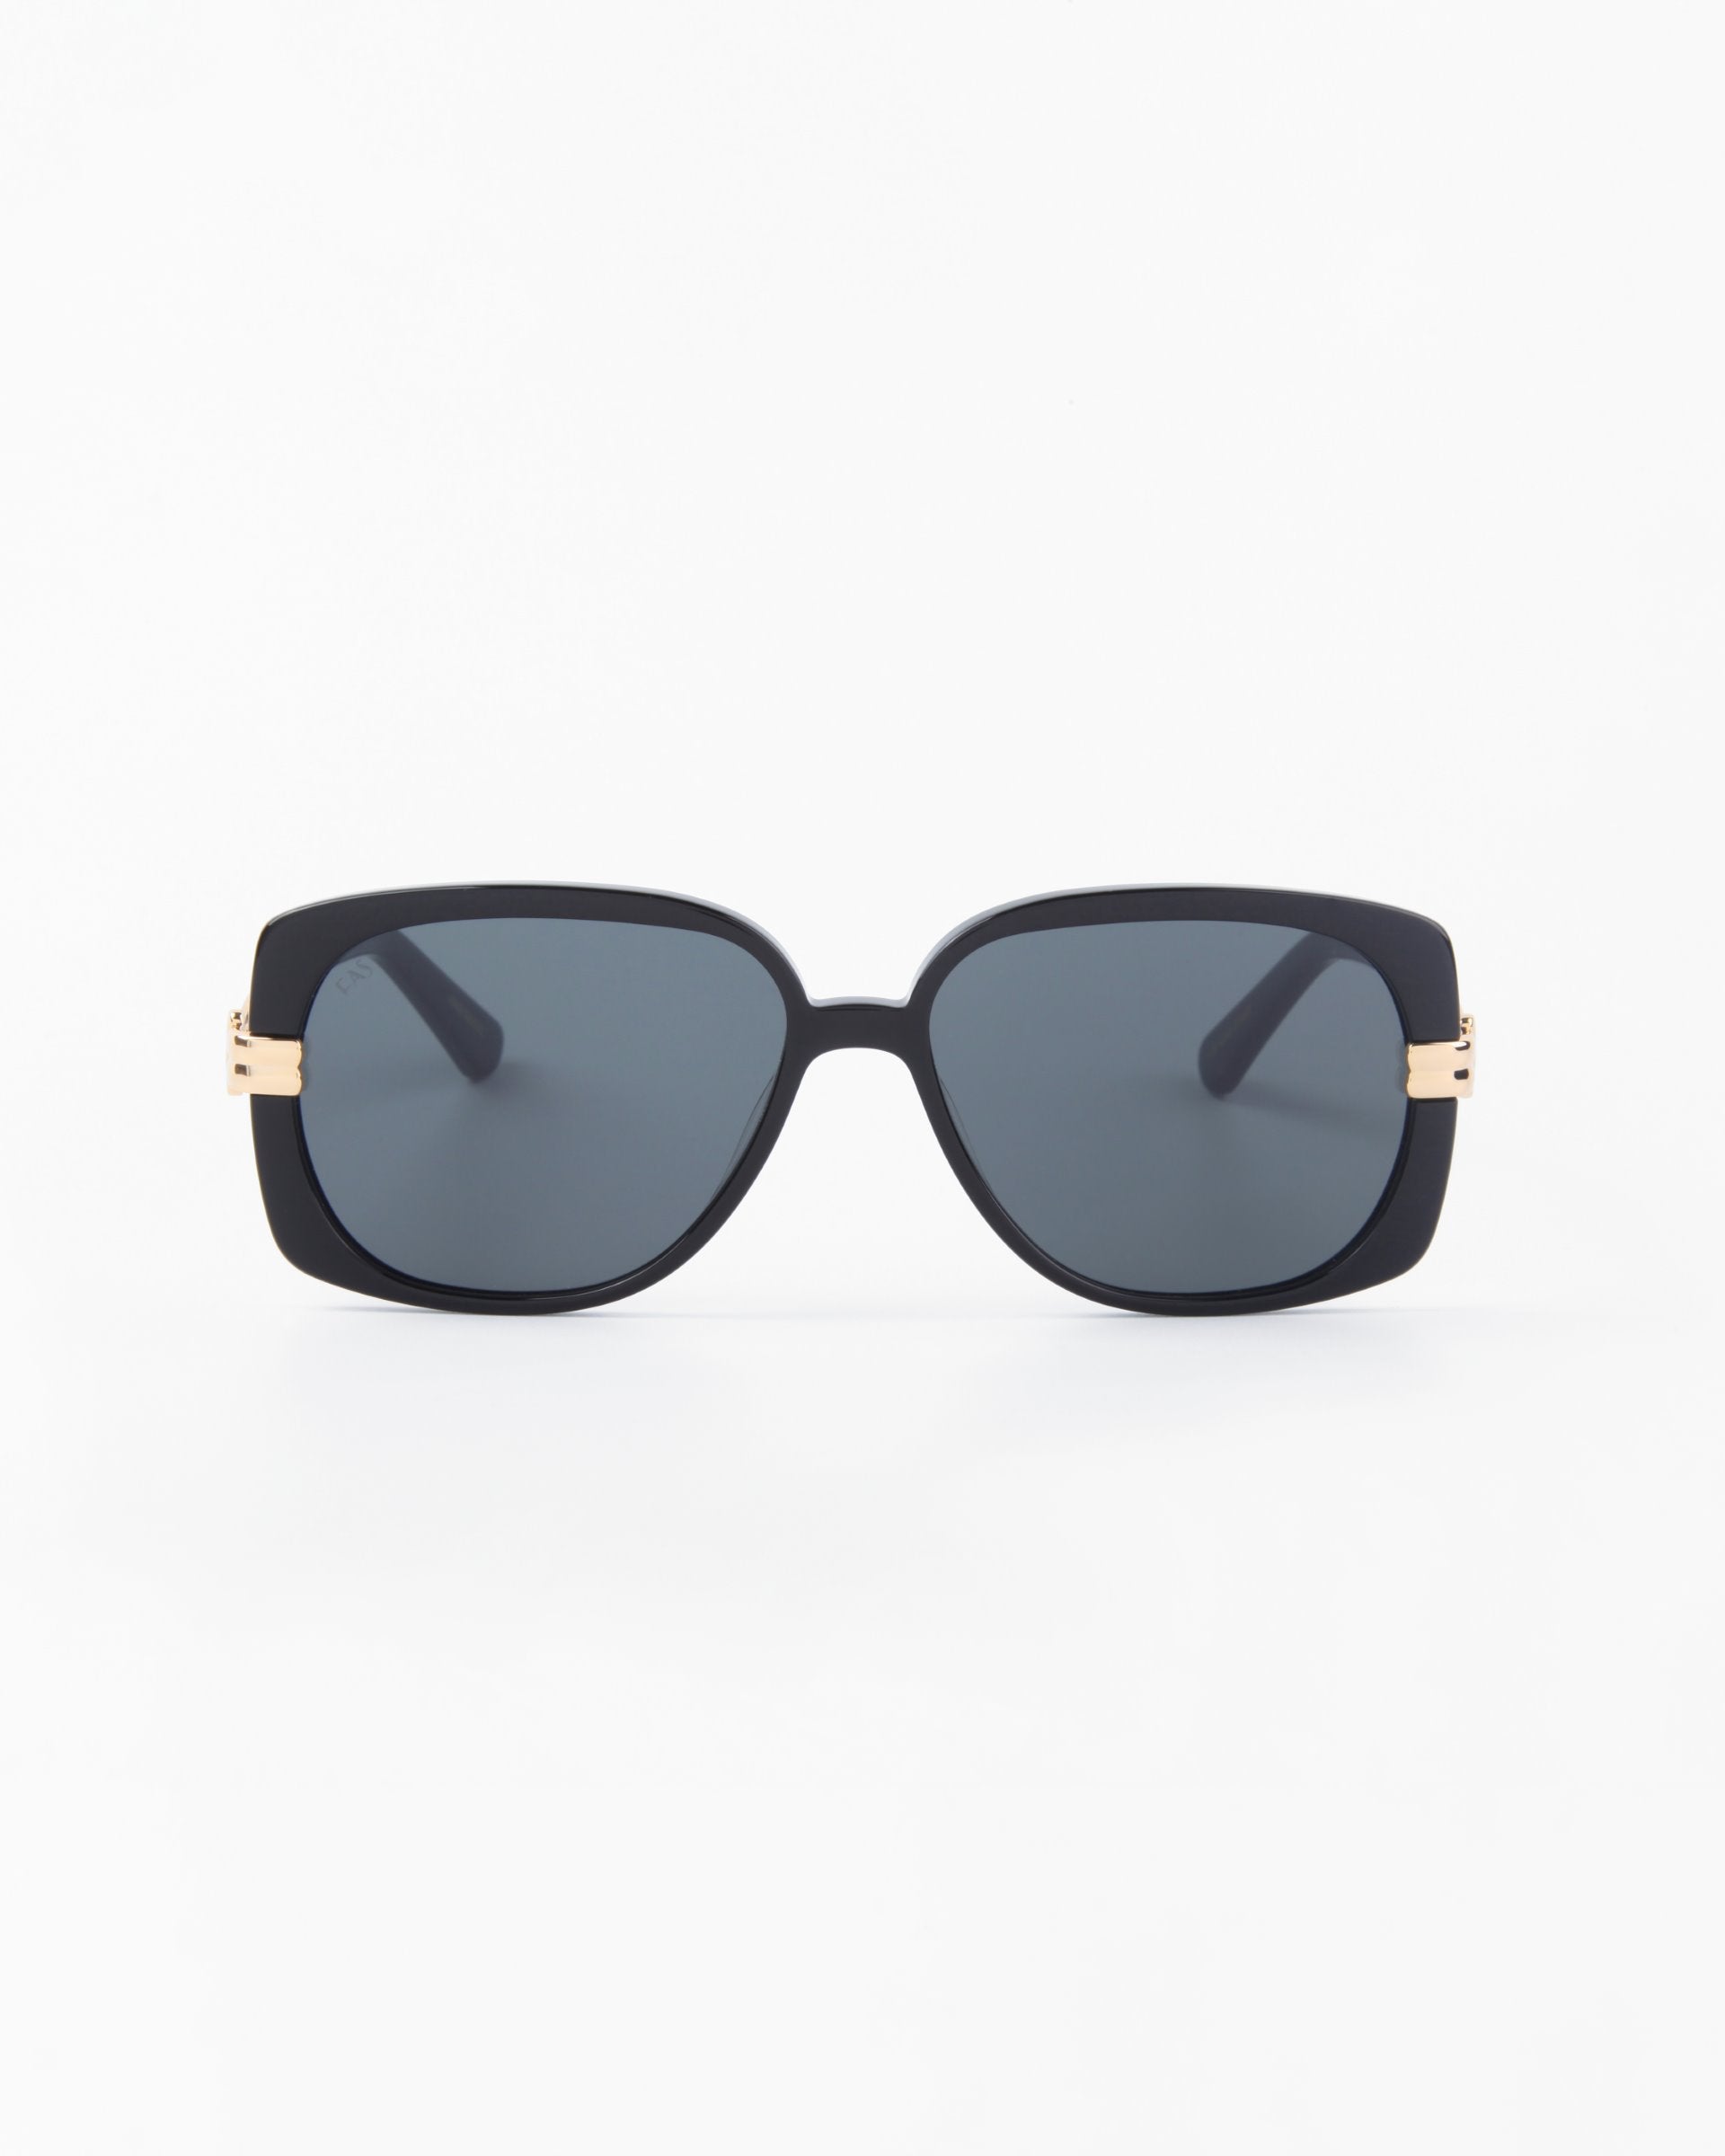 A pair of black rectangular For Art&#39;s Sake® Icon sunglasses with dark, shatter-resistant nylon lenses. The sunglasses have thin temples, small gold accents near the hinges, and offer full UVA &amp; UVB protection. Handmade with precision, they are set against a plain white surface.